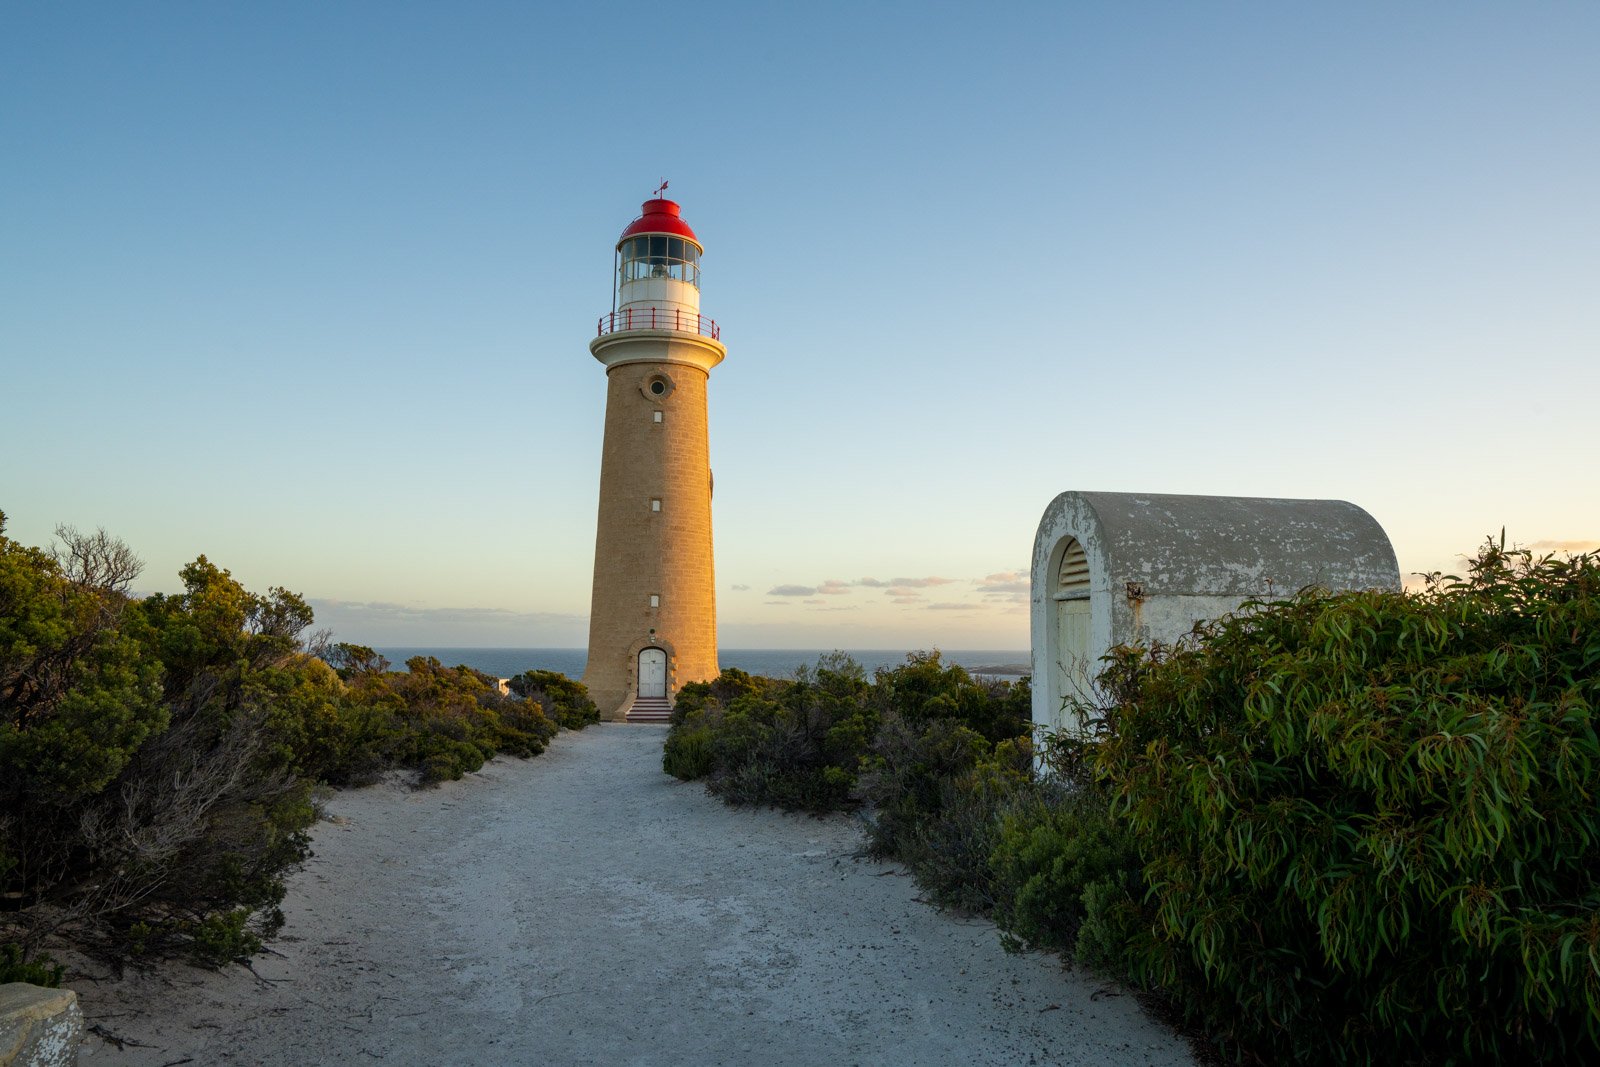 Cape de Couedic Lighthouse under late afternoon